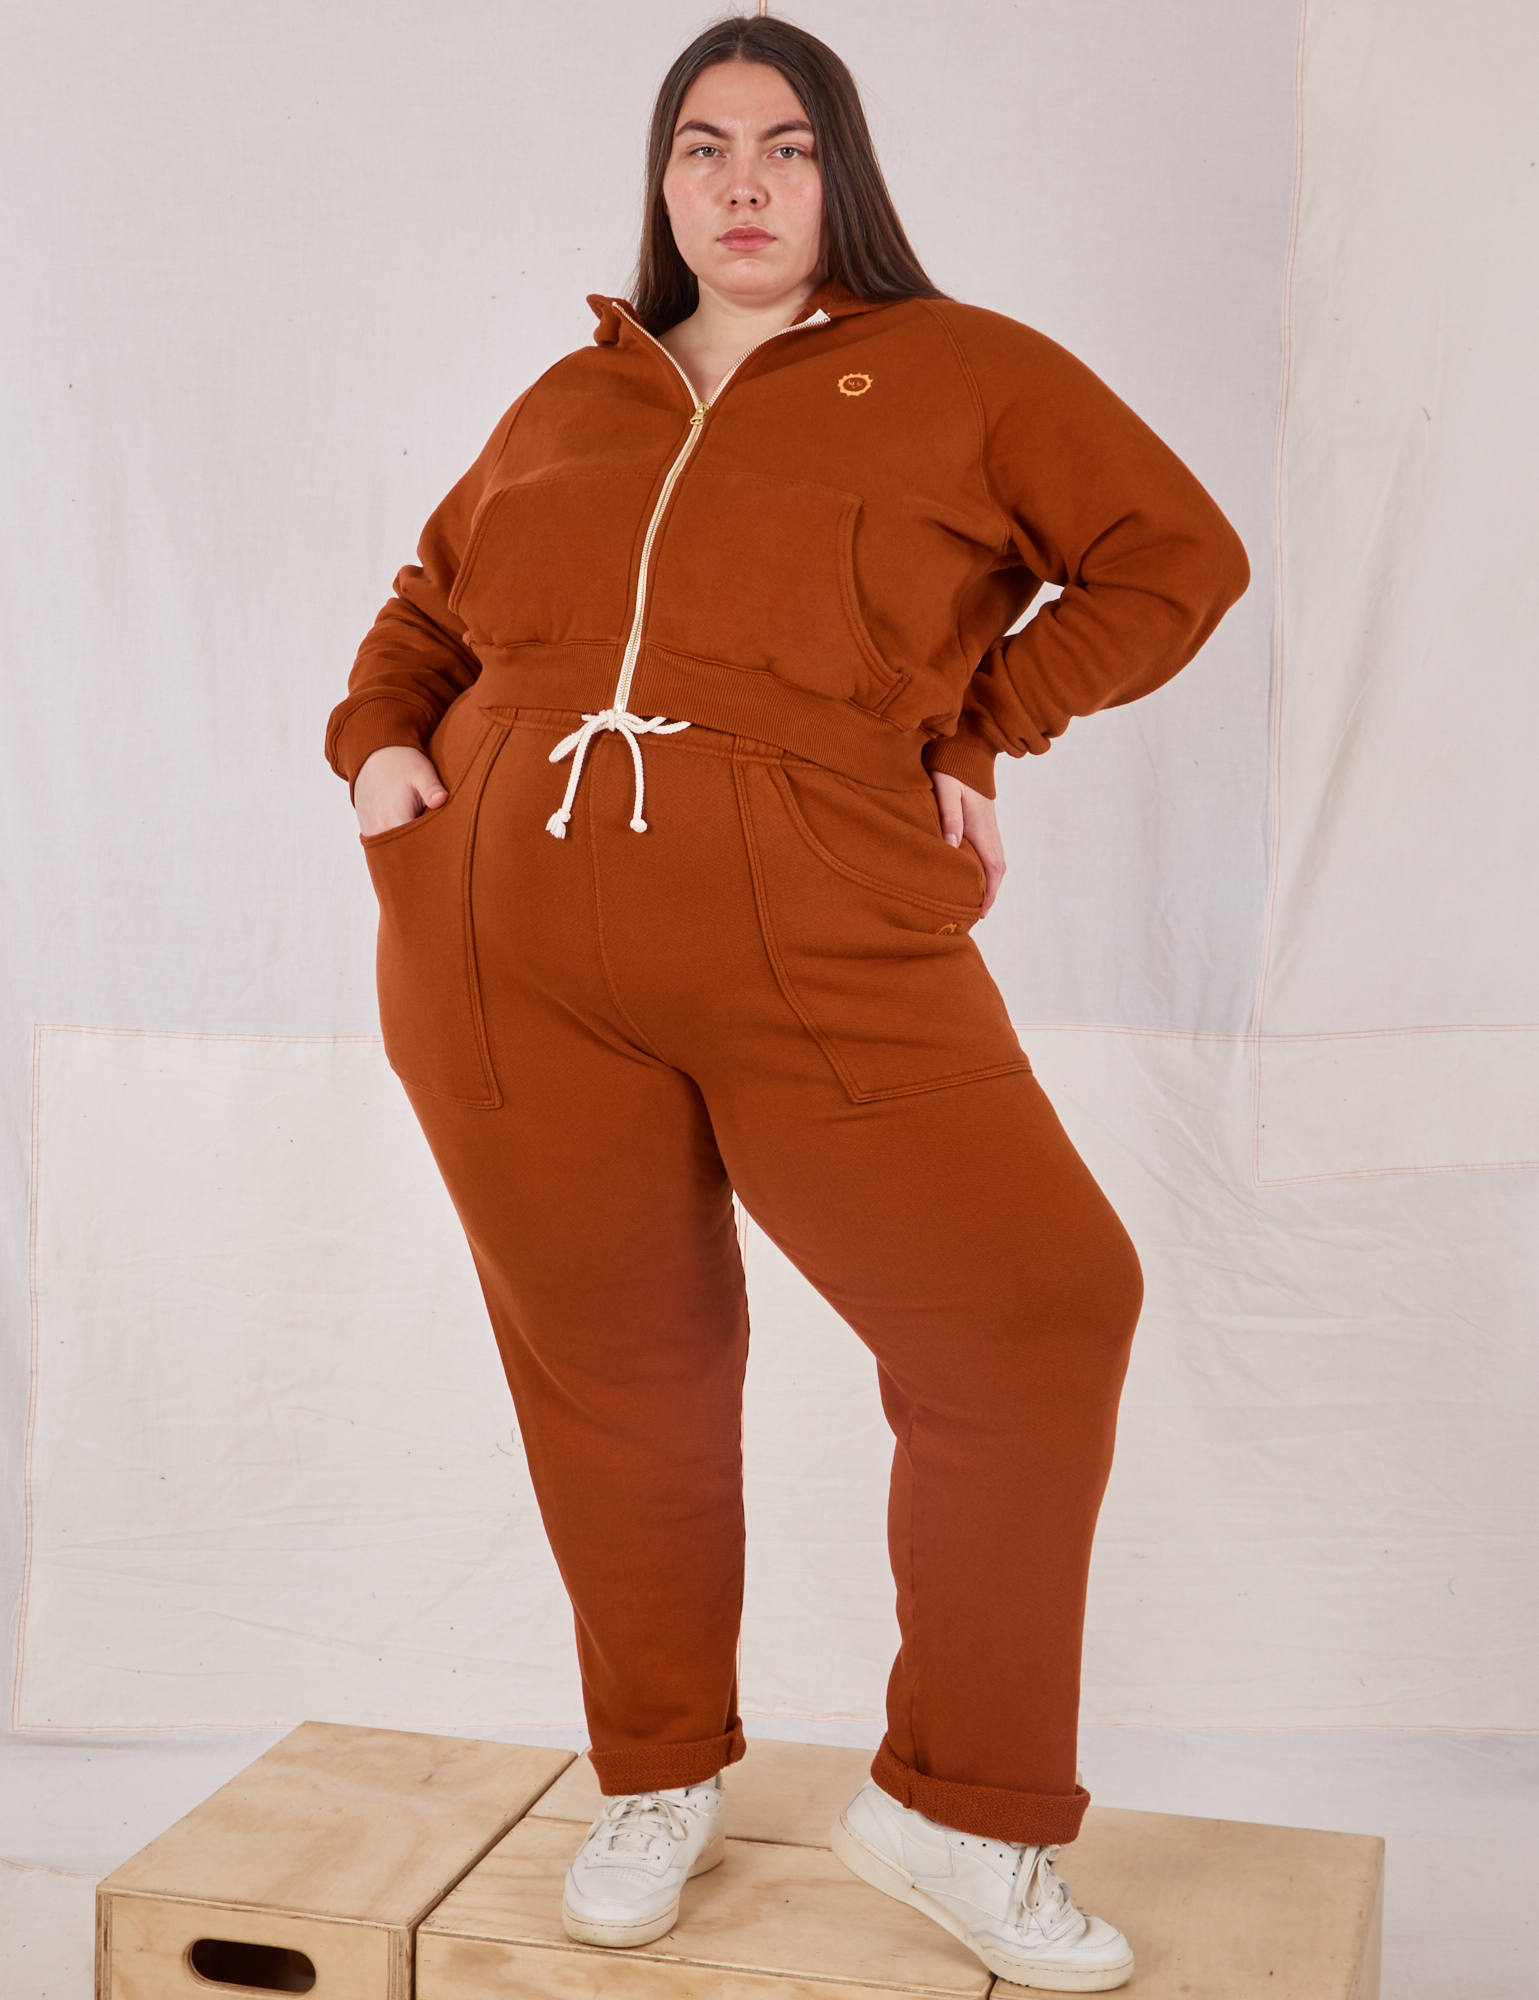 Marielena is 5&#39;8&quot; and wearing L Cropped Zip Hoodie in Burnt Terracotta paired with matching Rolled Cuff Sweat Pants